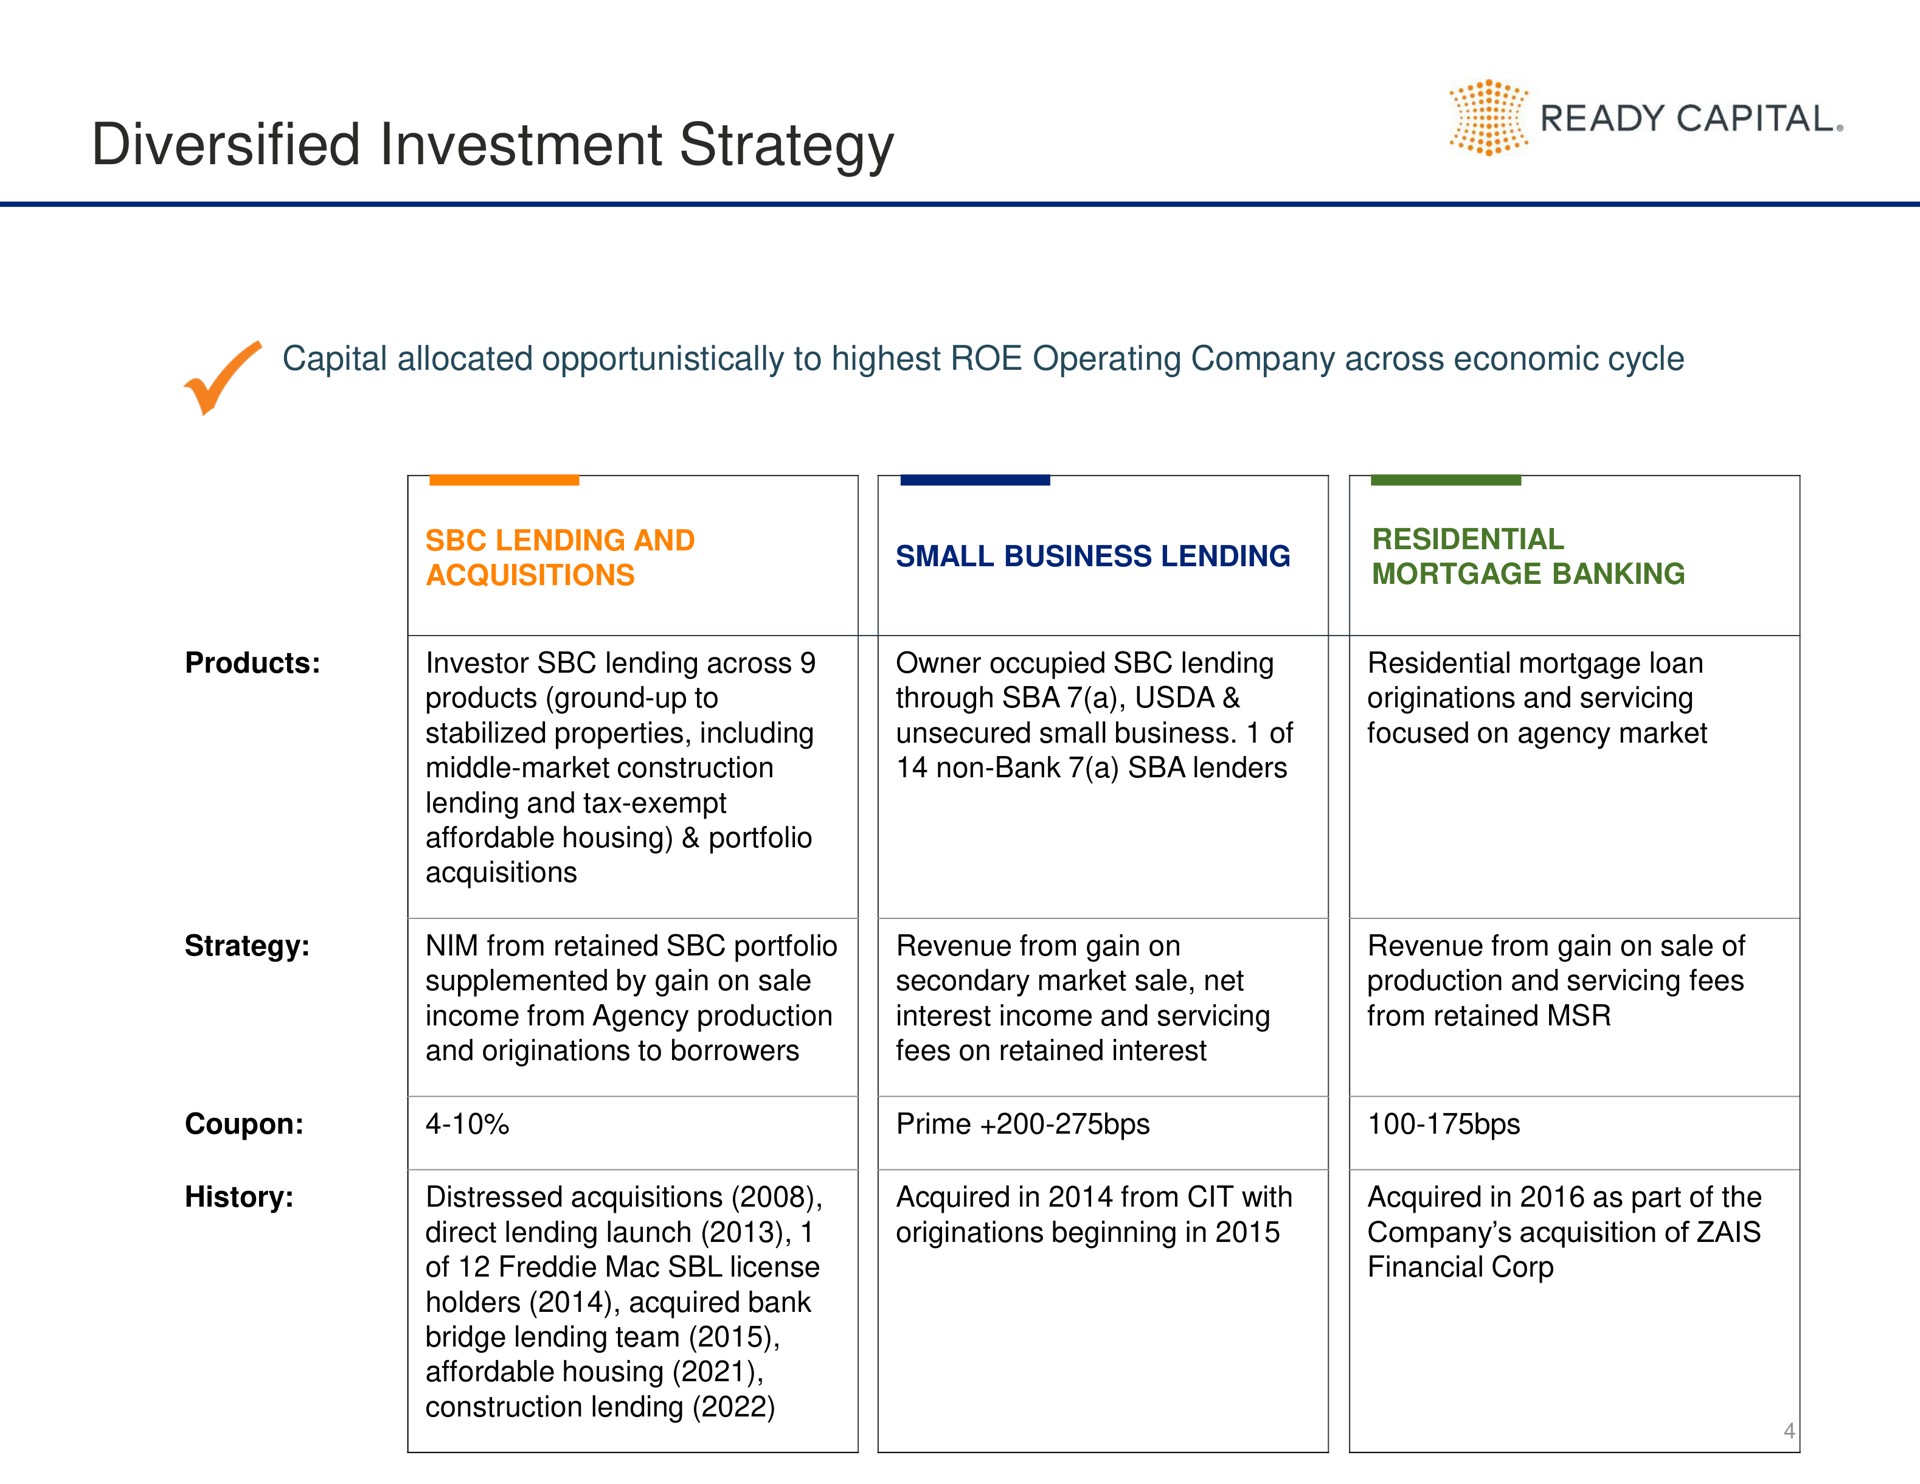 diversified investment strategy ready capital | Ready Capital